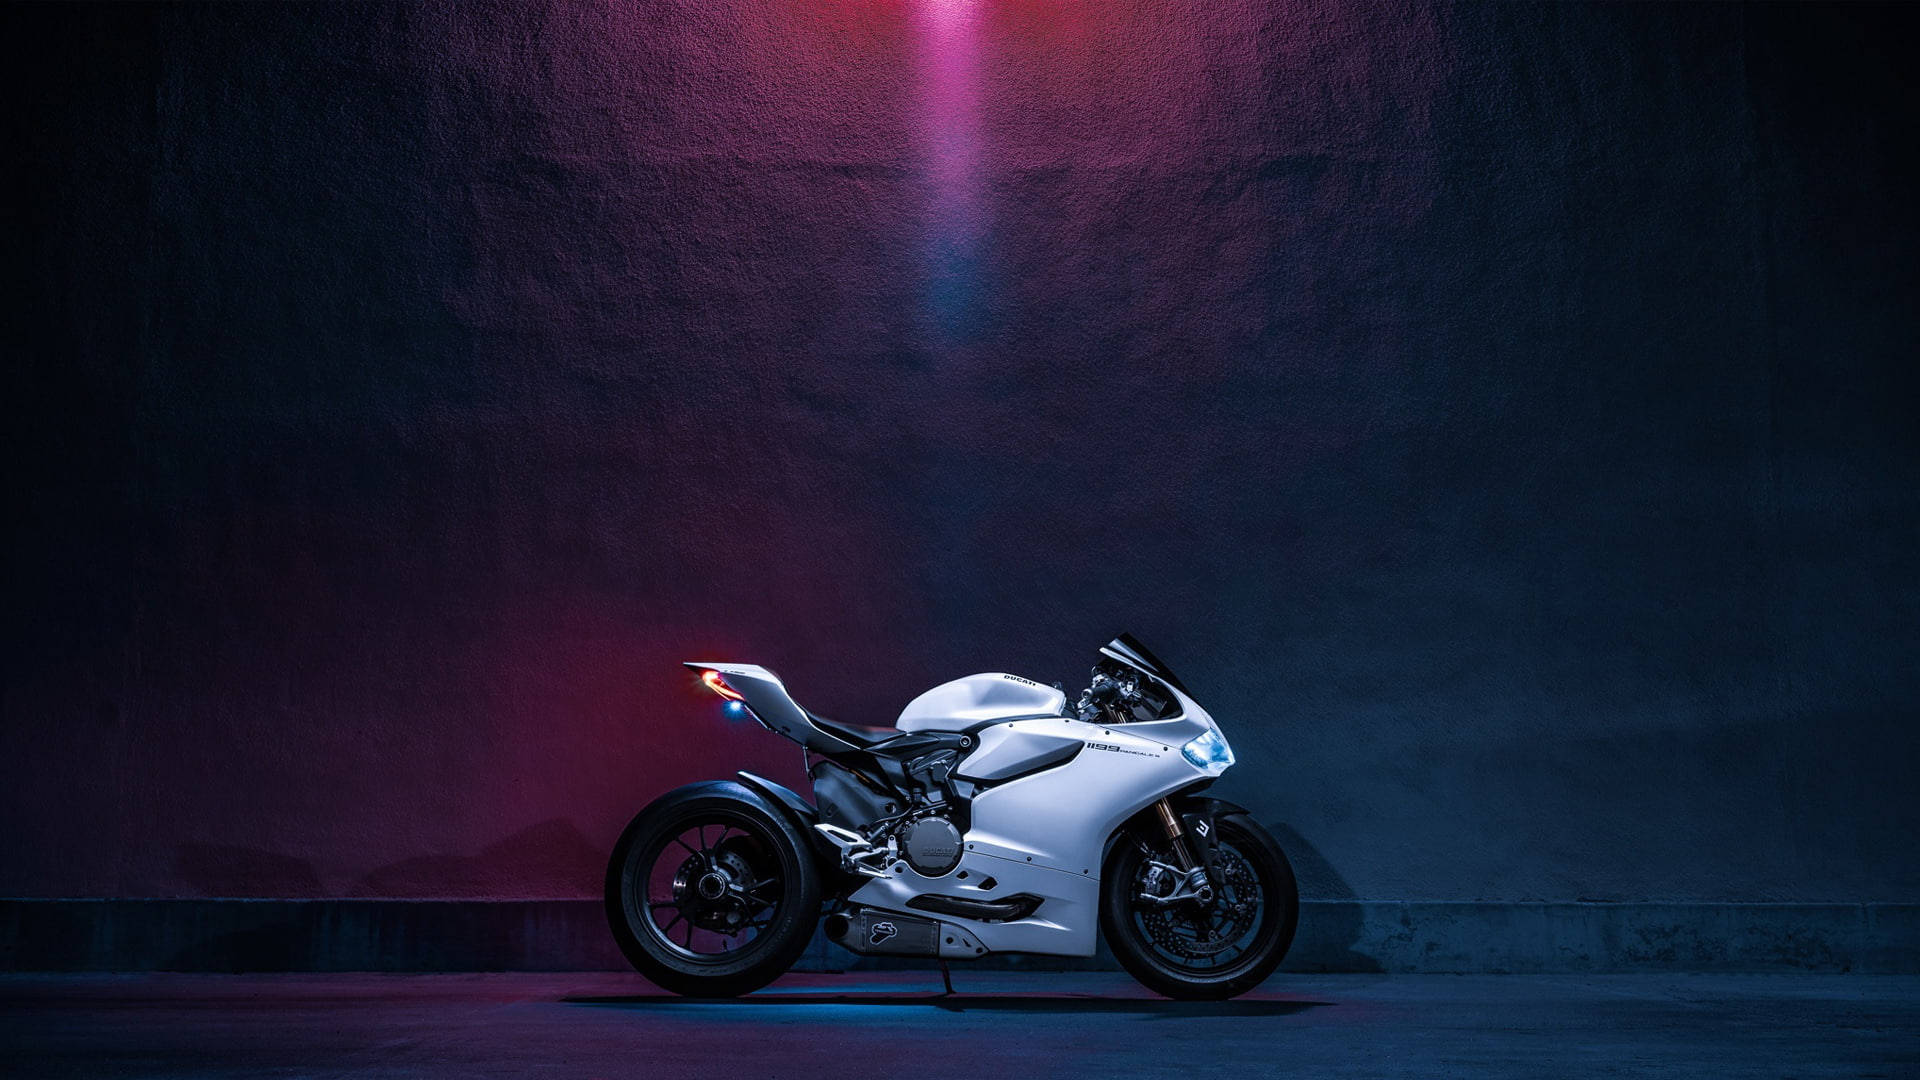 Experience The Power Of The Open Road With Ducati Wallpaper